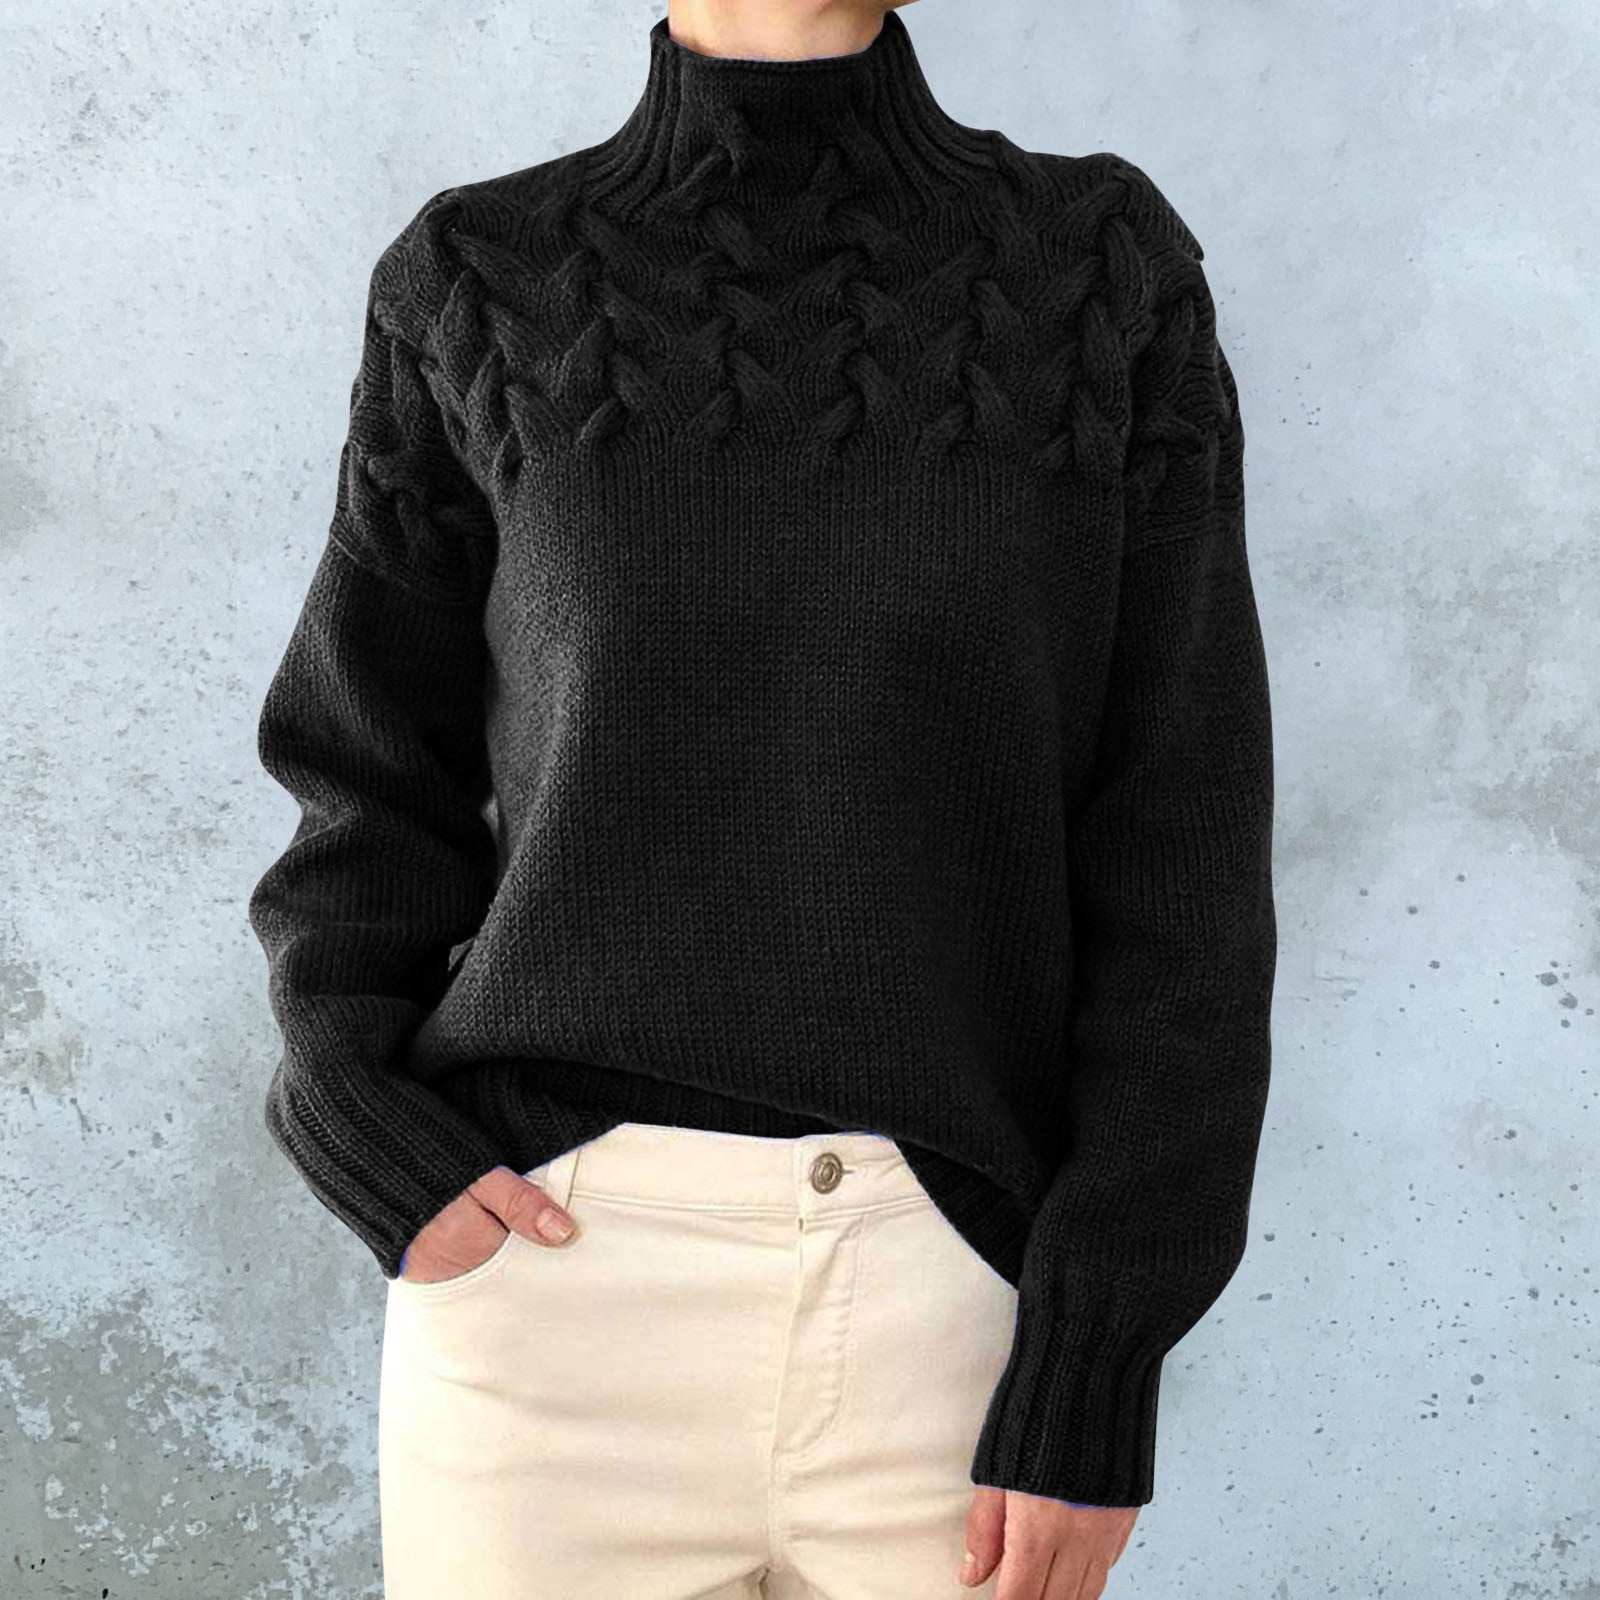 MPWEGNP Black Women Turtleneck Sweater Cowl Neck for Sweaters and ...